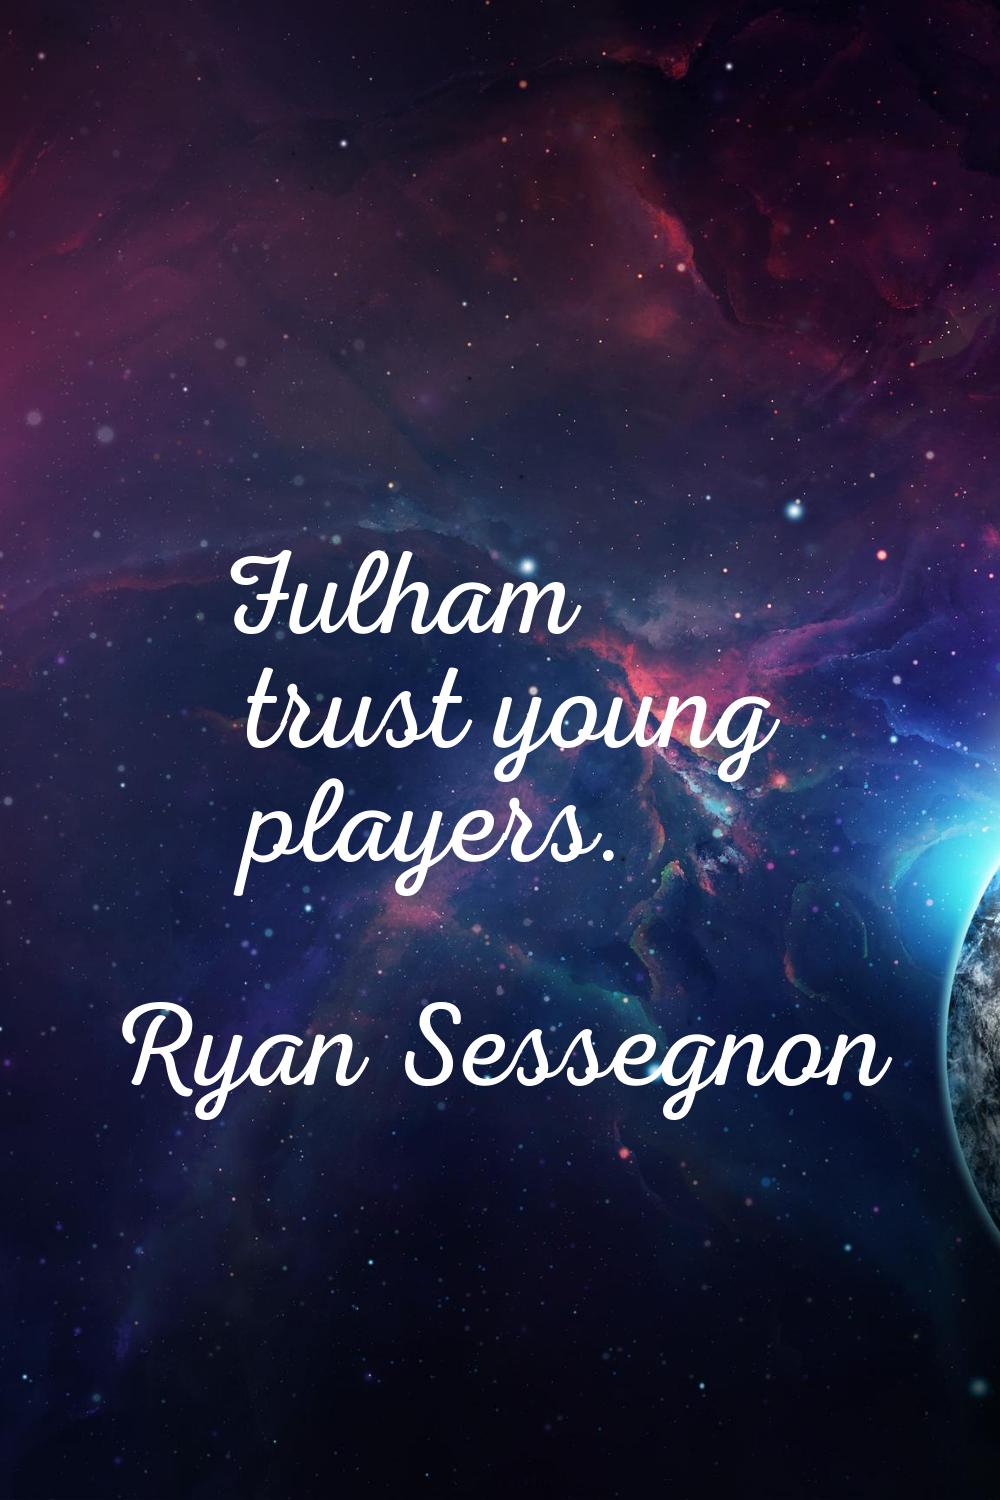 Fulham trust young players.